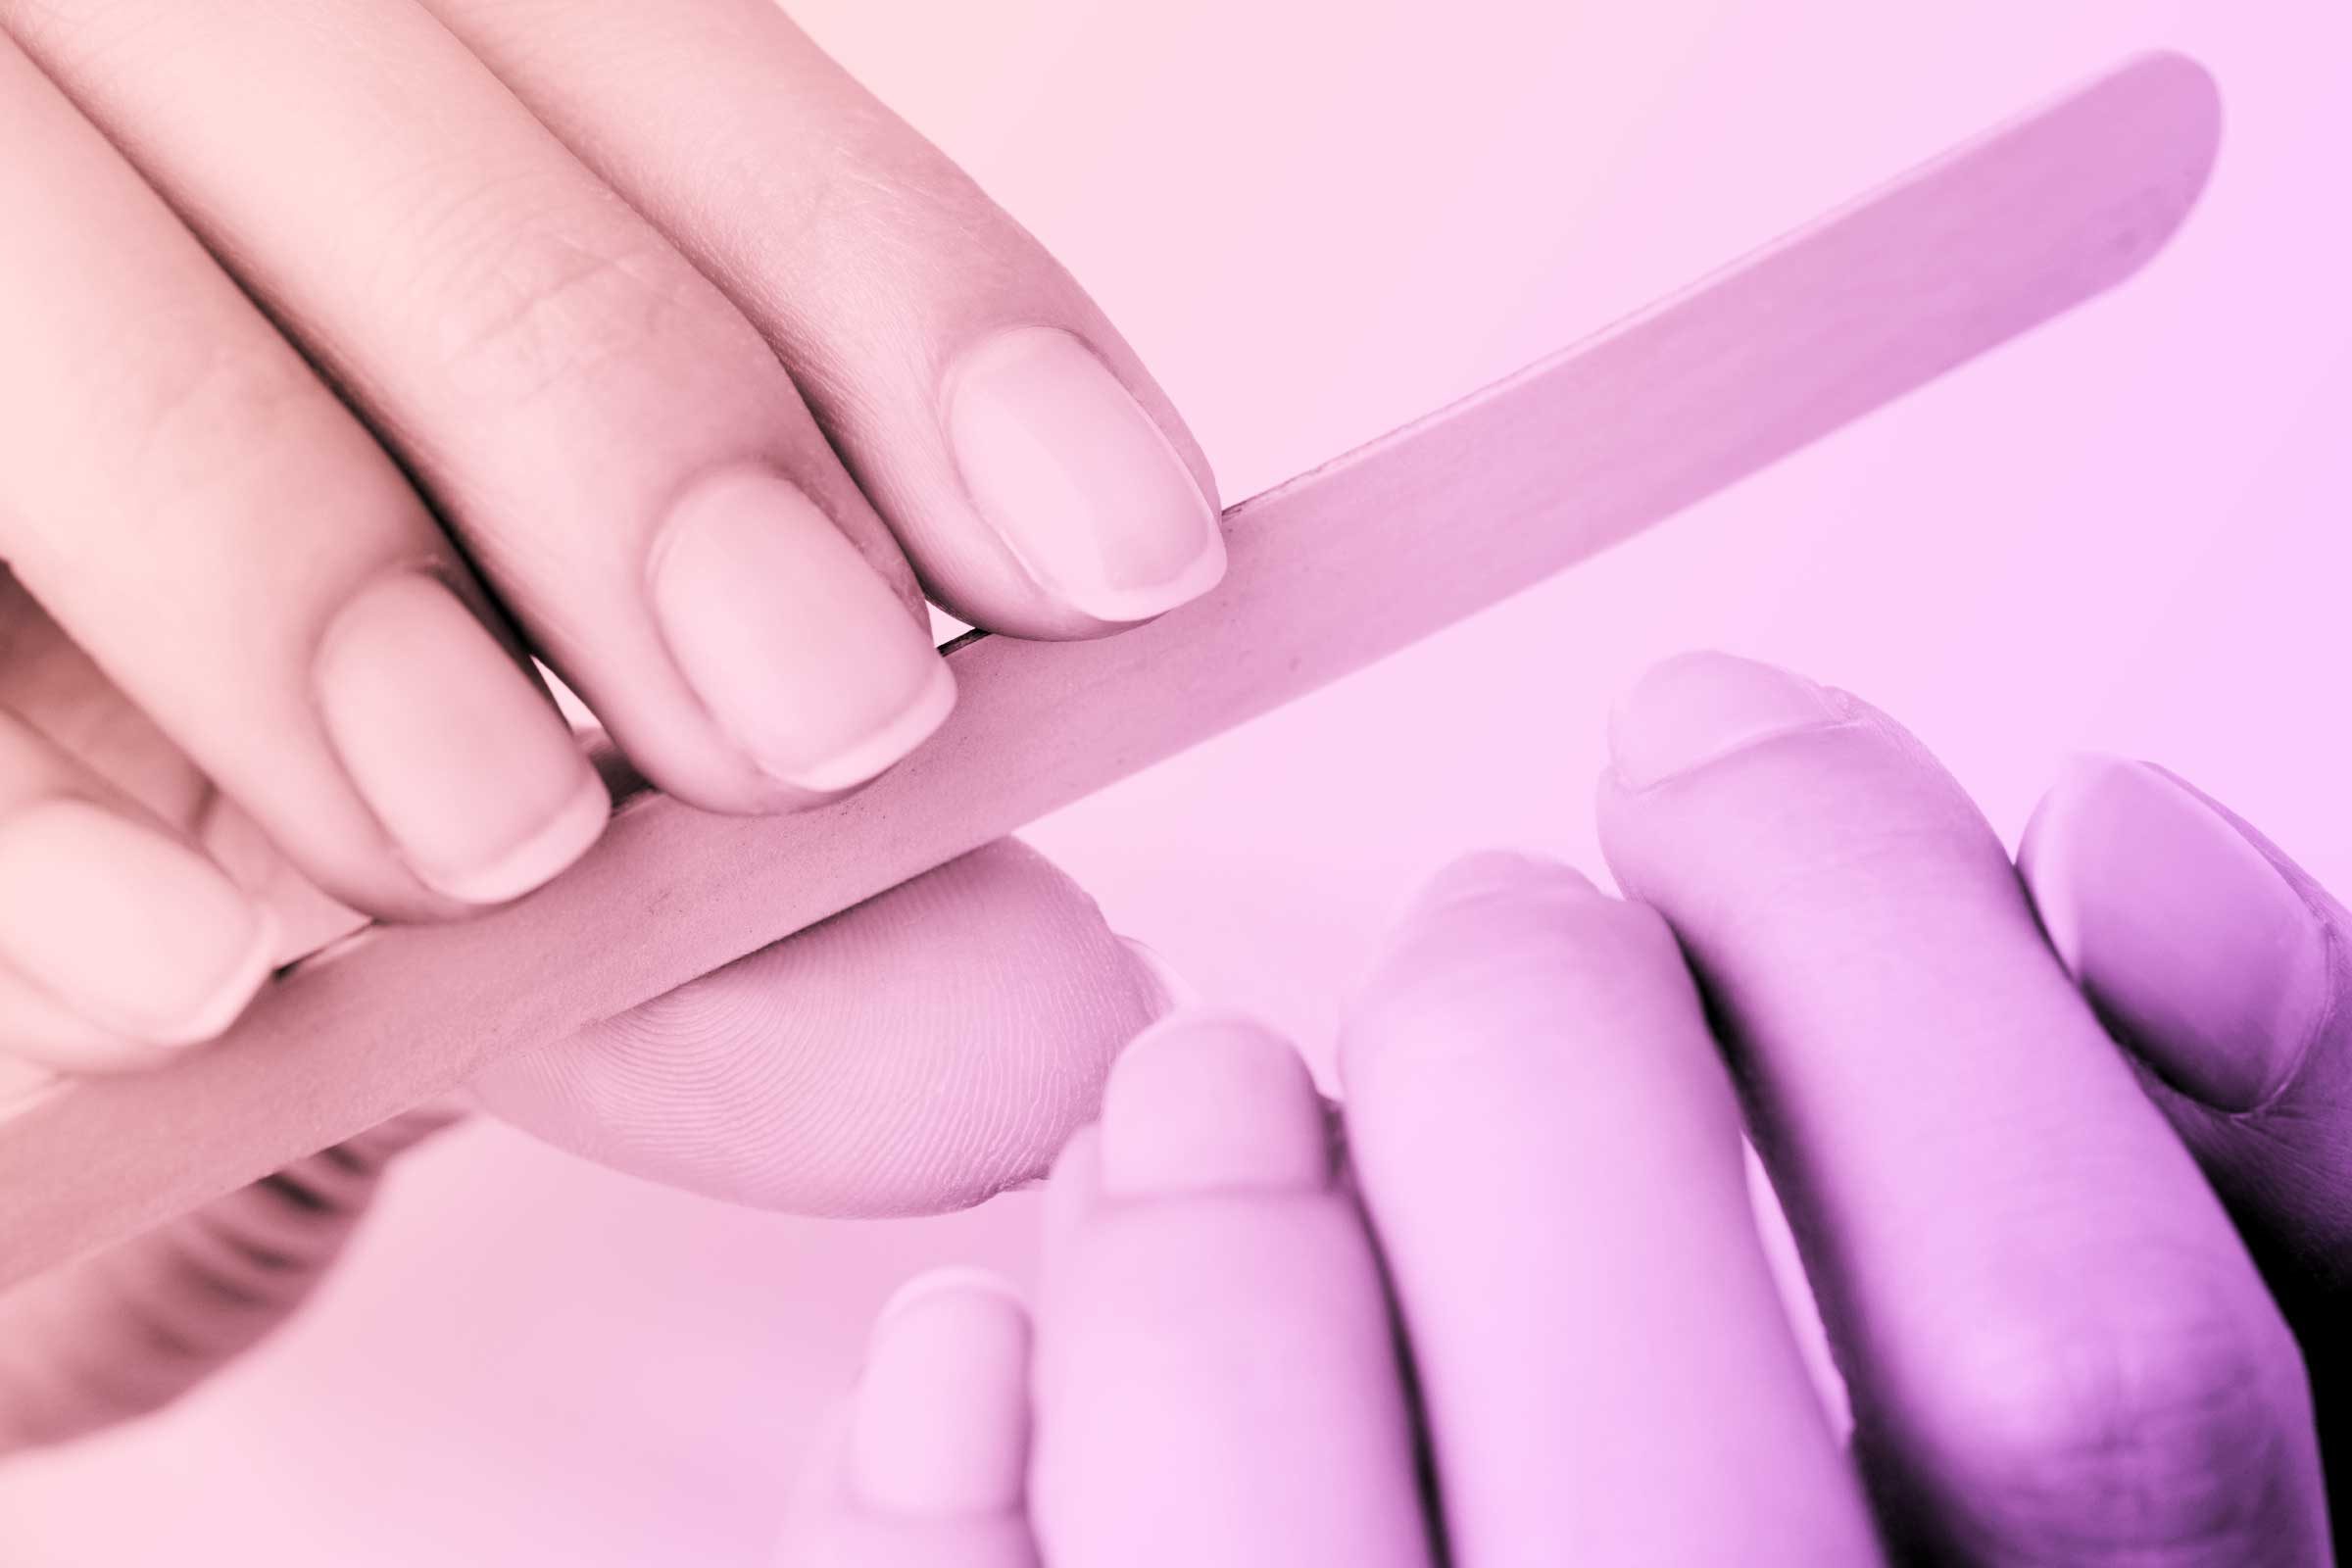 13 Tips to Get Healthy, Gorgeous Nails